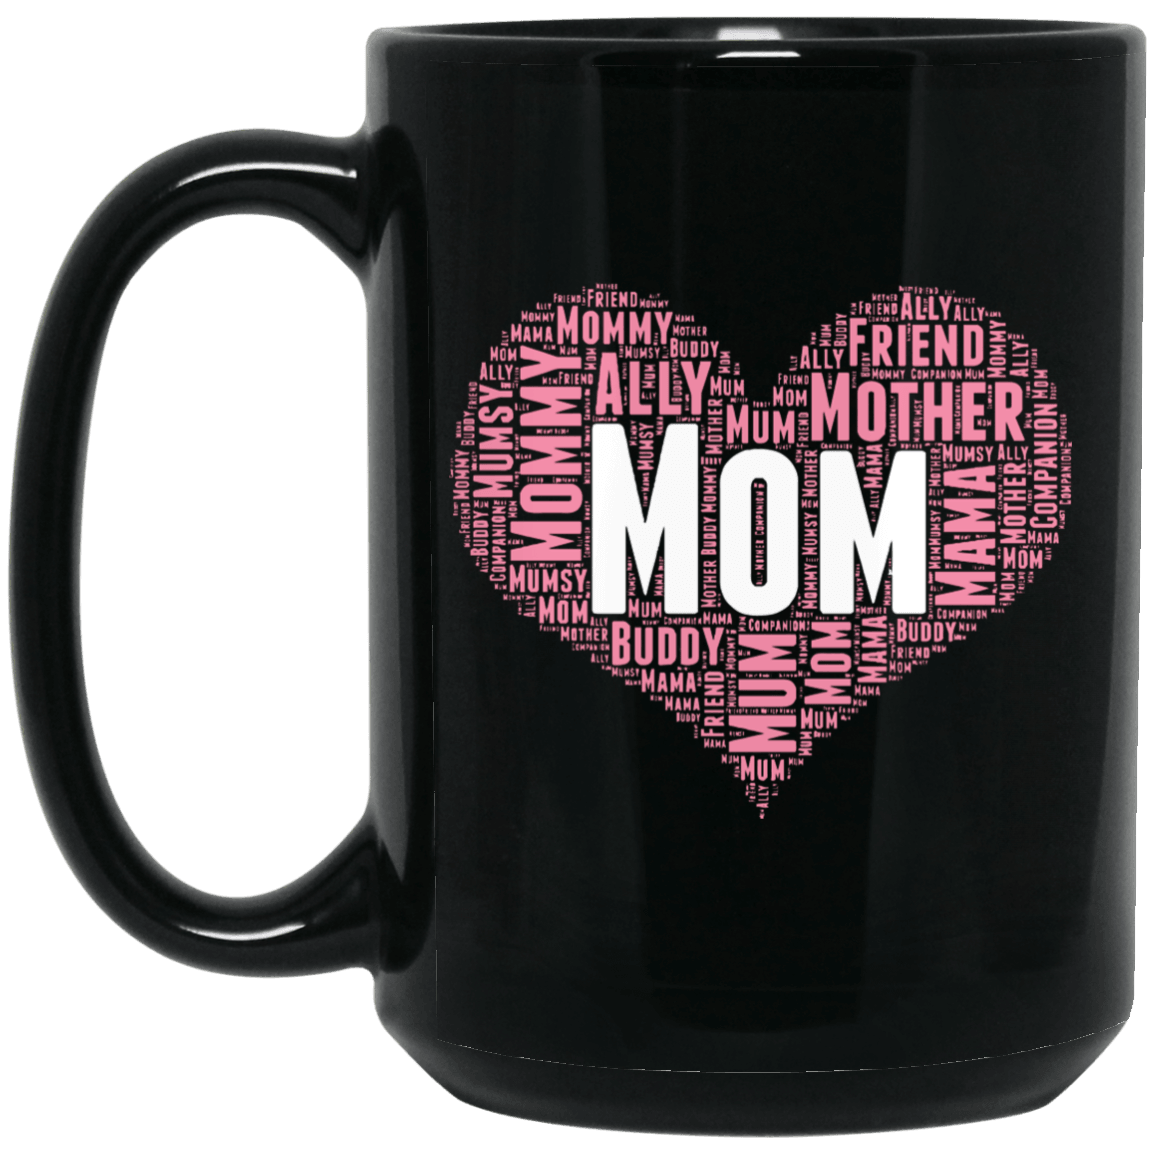 Designs by MyUtopia Shout Out:All the Ways Mom is Special in Your Heart 15 oz. Ceramic Coffee Mug - Black,Black / 15 oz,Ceramic Coffee Mug